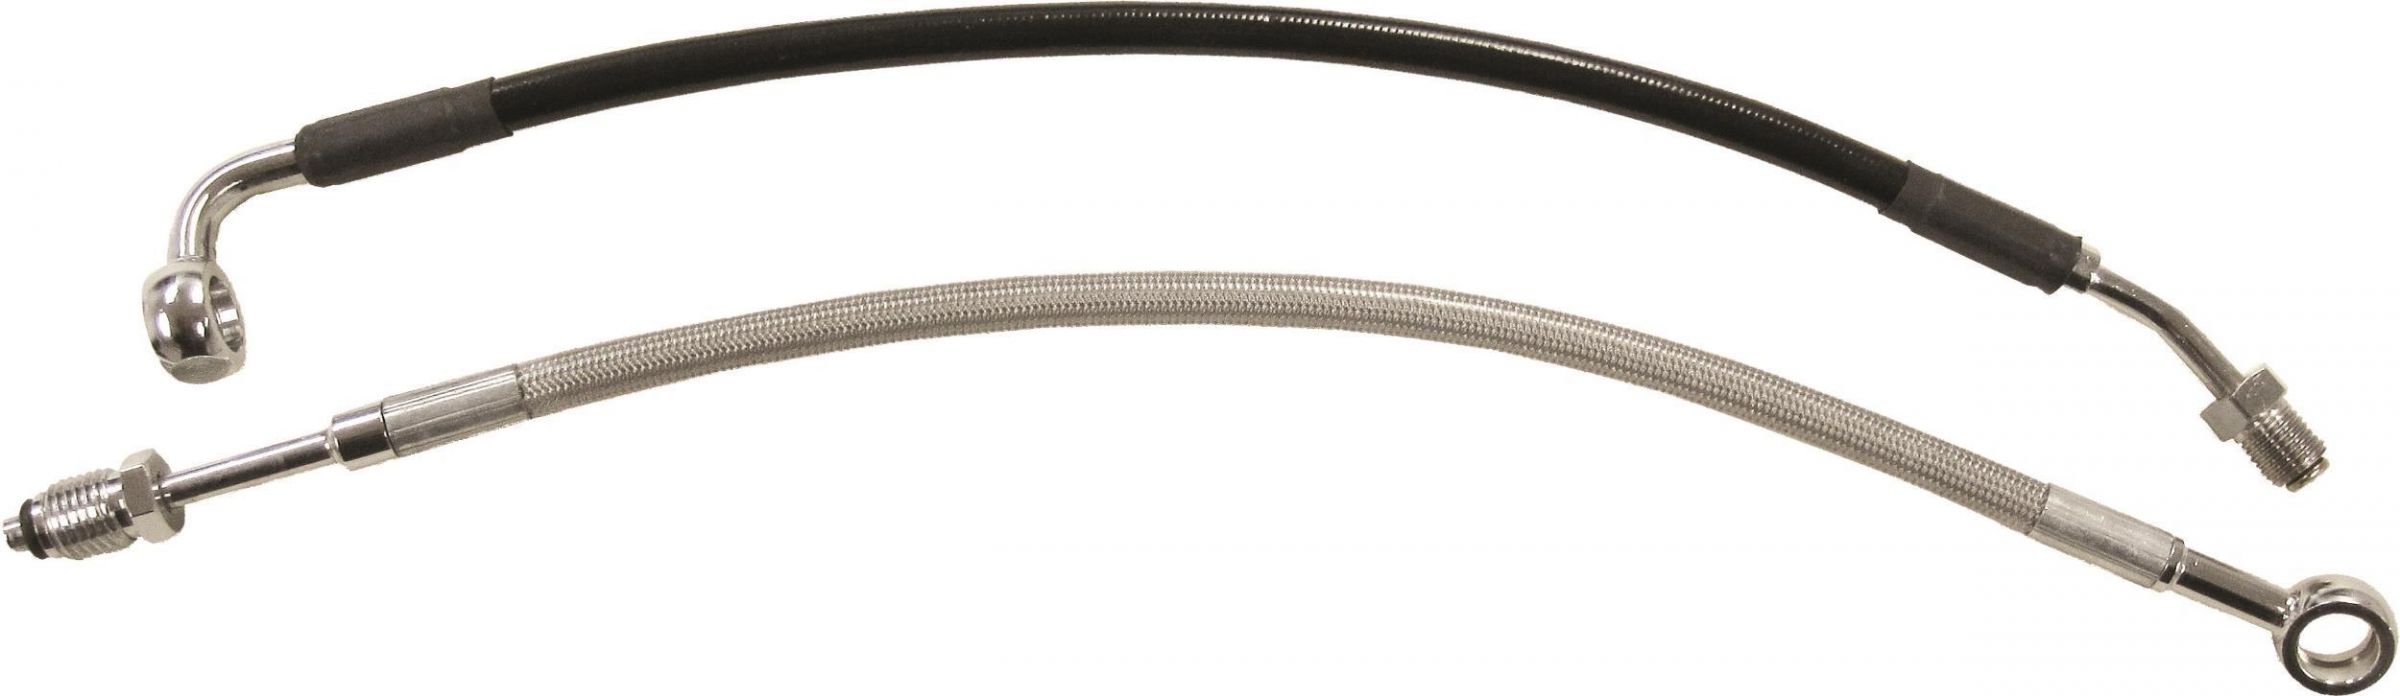 86OU-GOODRIDG-HD0006-1CBK-8 Stainless Steel Braided Hydraulic Clutch Line Kit - 8in. Over Stock - Black Hose